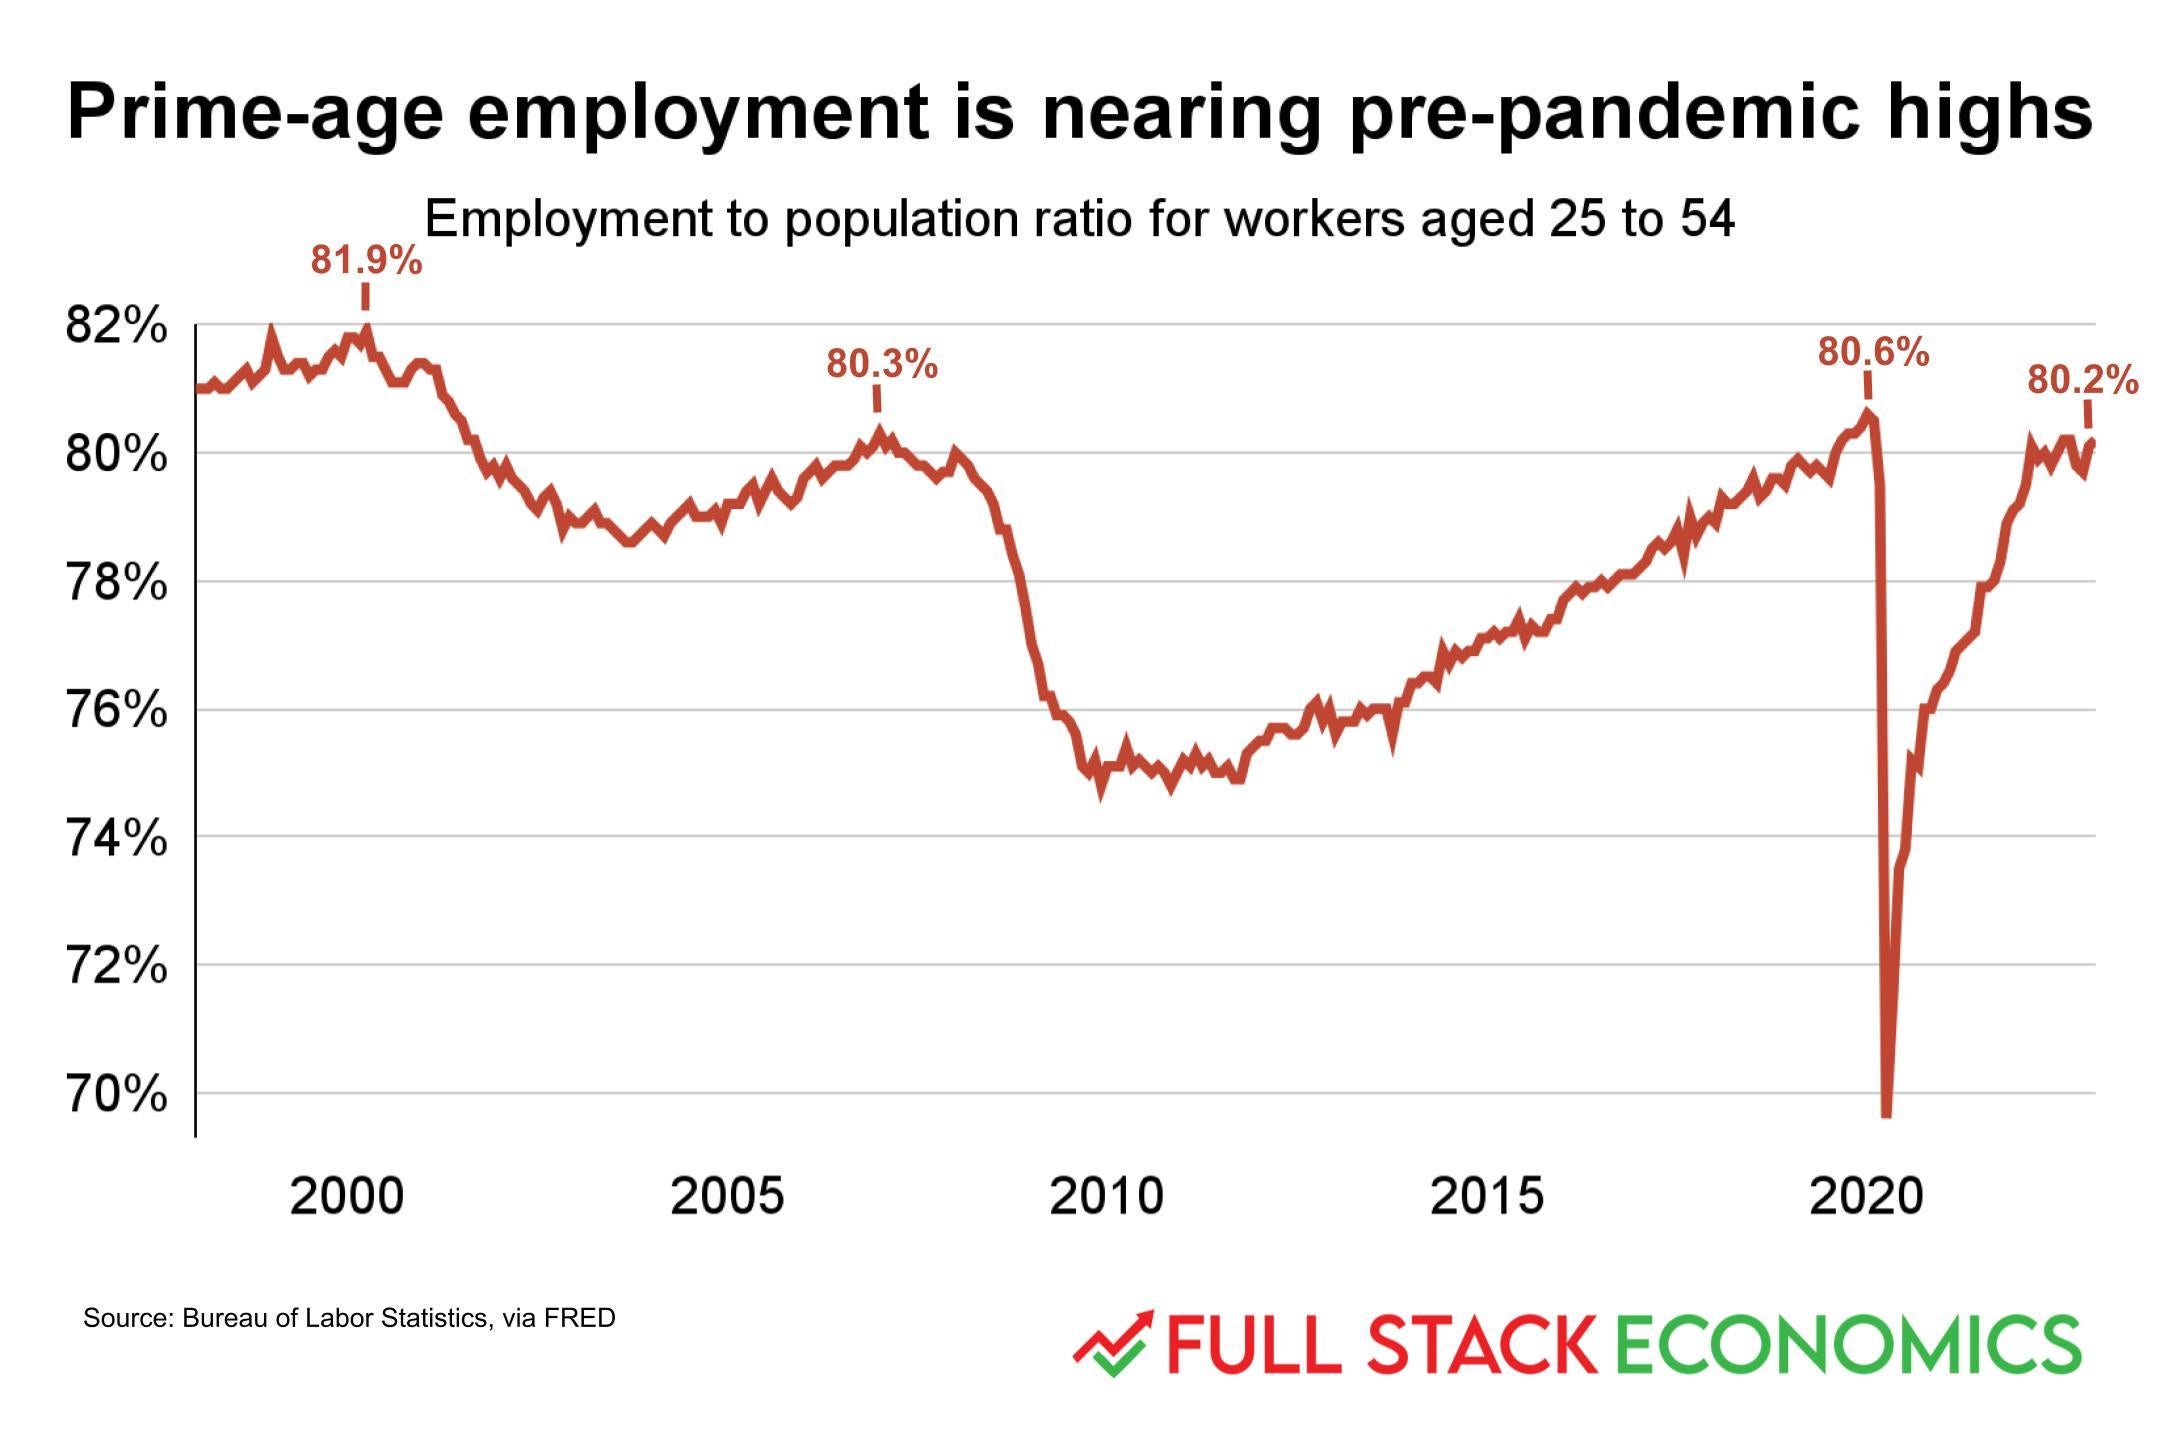 Prime-age unemployment is reaching pre-pandemic highs.